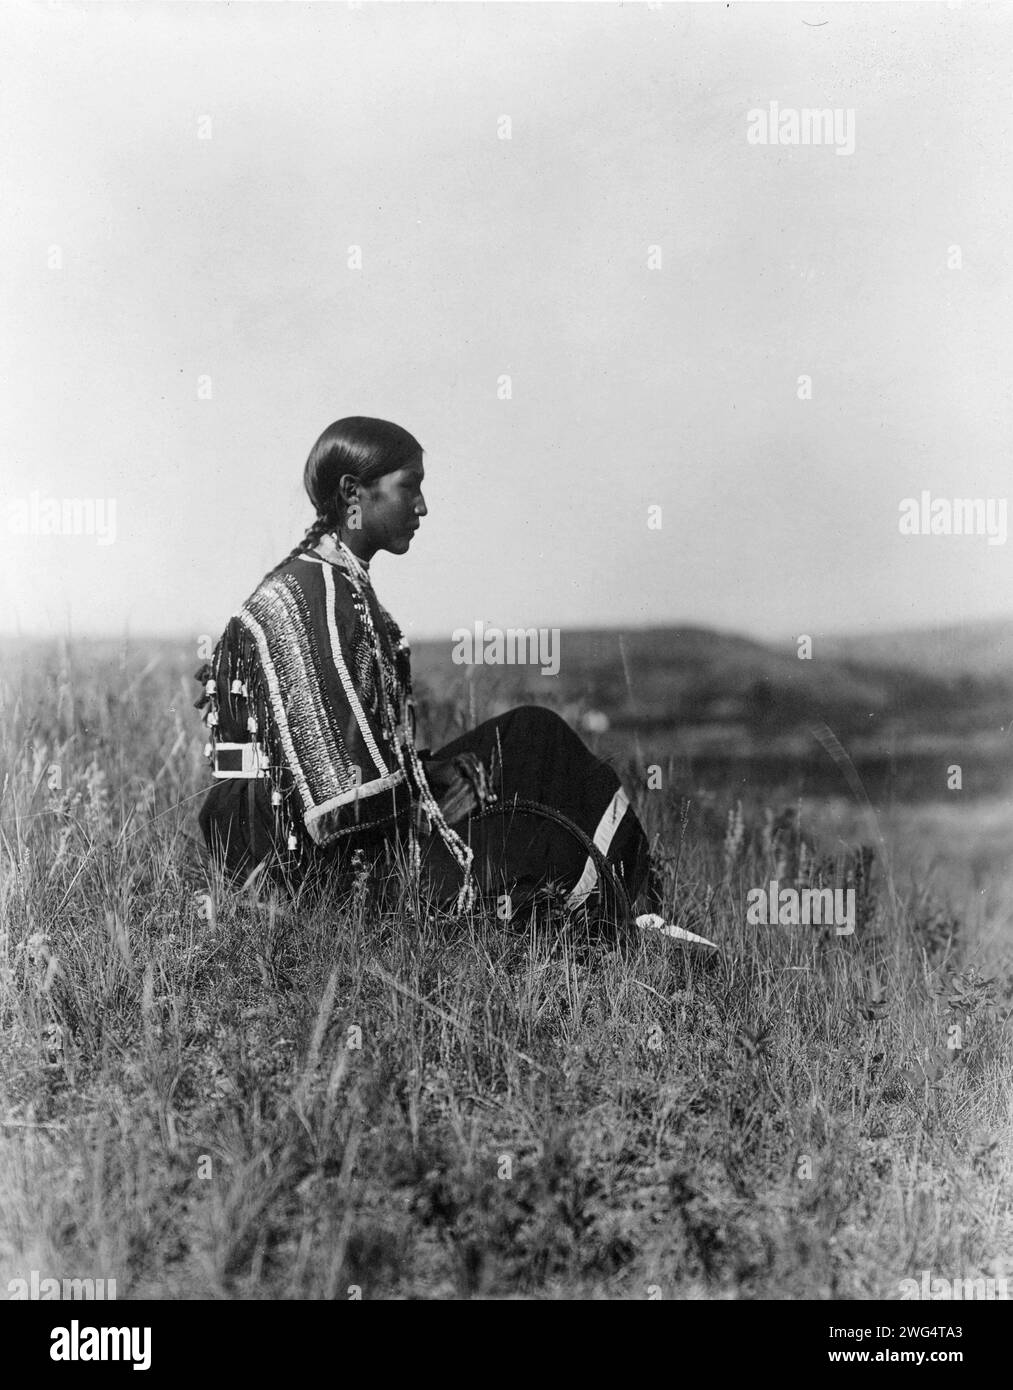 Day dreams-Piegan, c1910. Young Piegan Indian woman, wearing beaded dress, seated on hill. Stock Photo